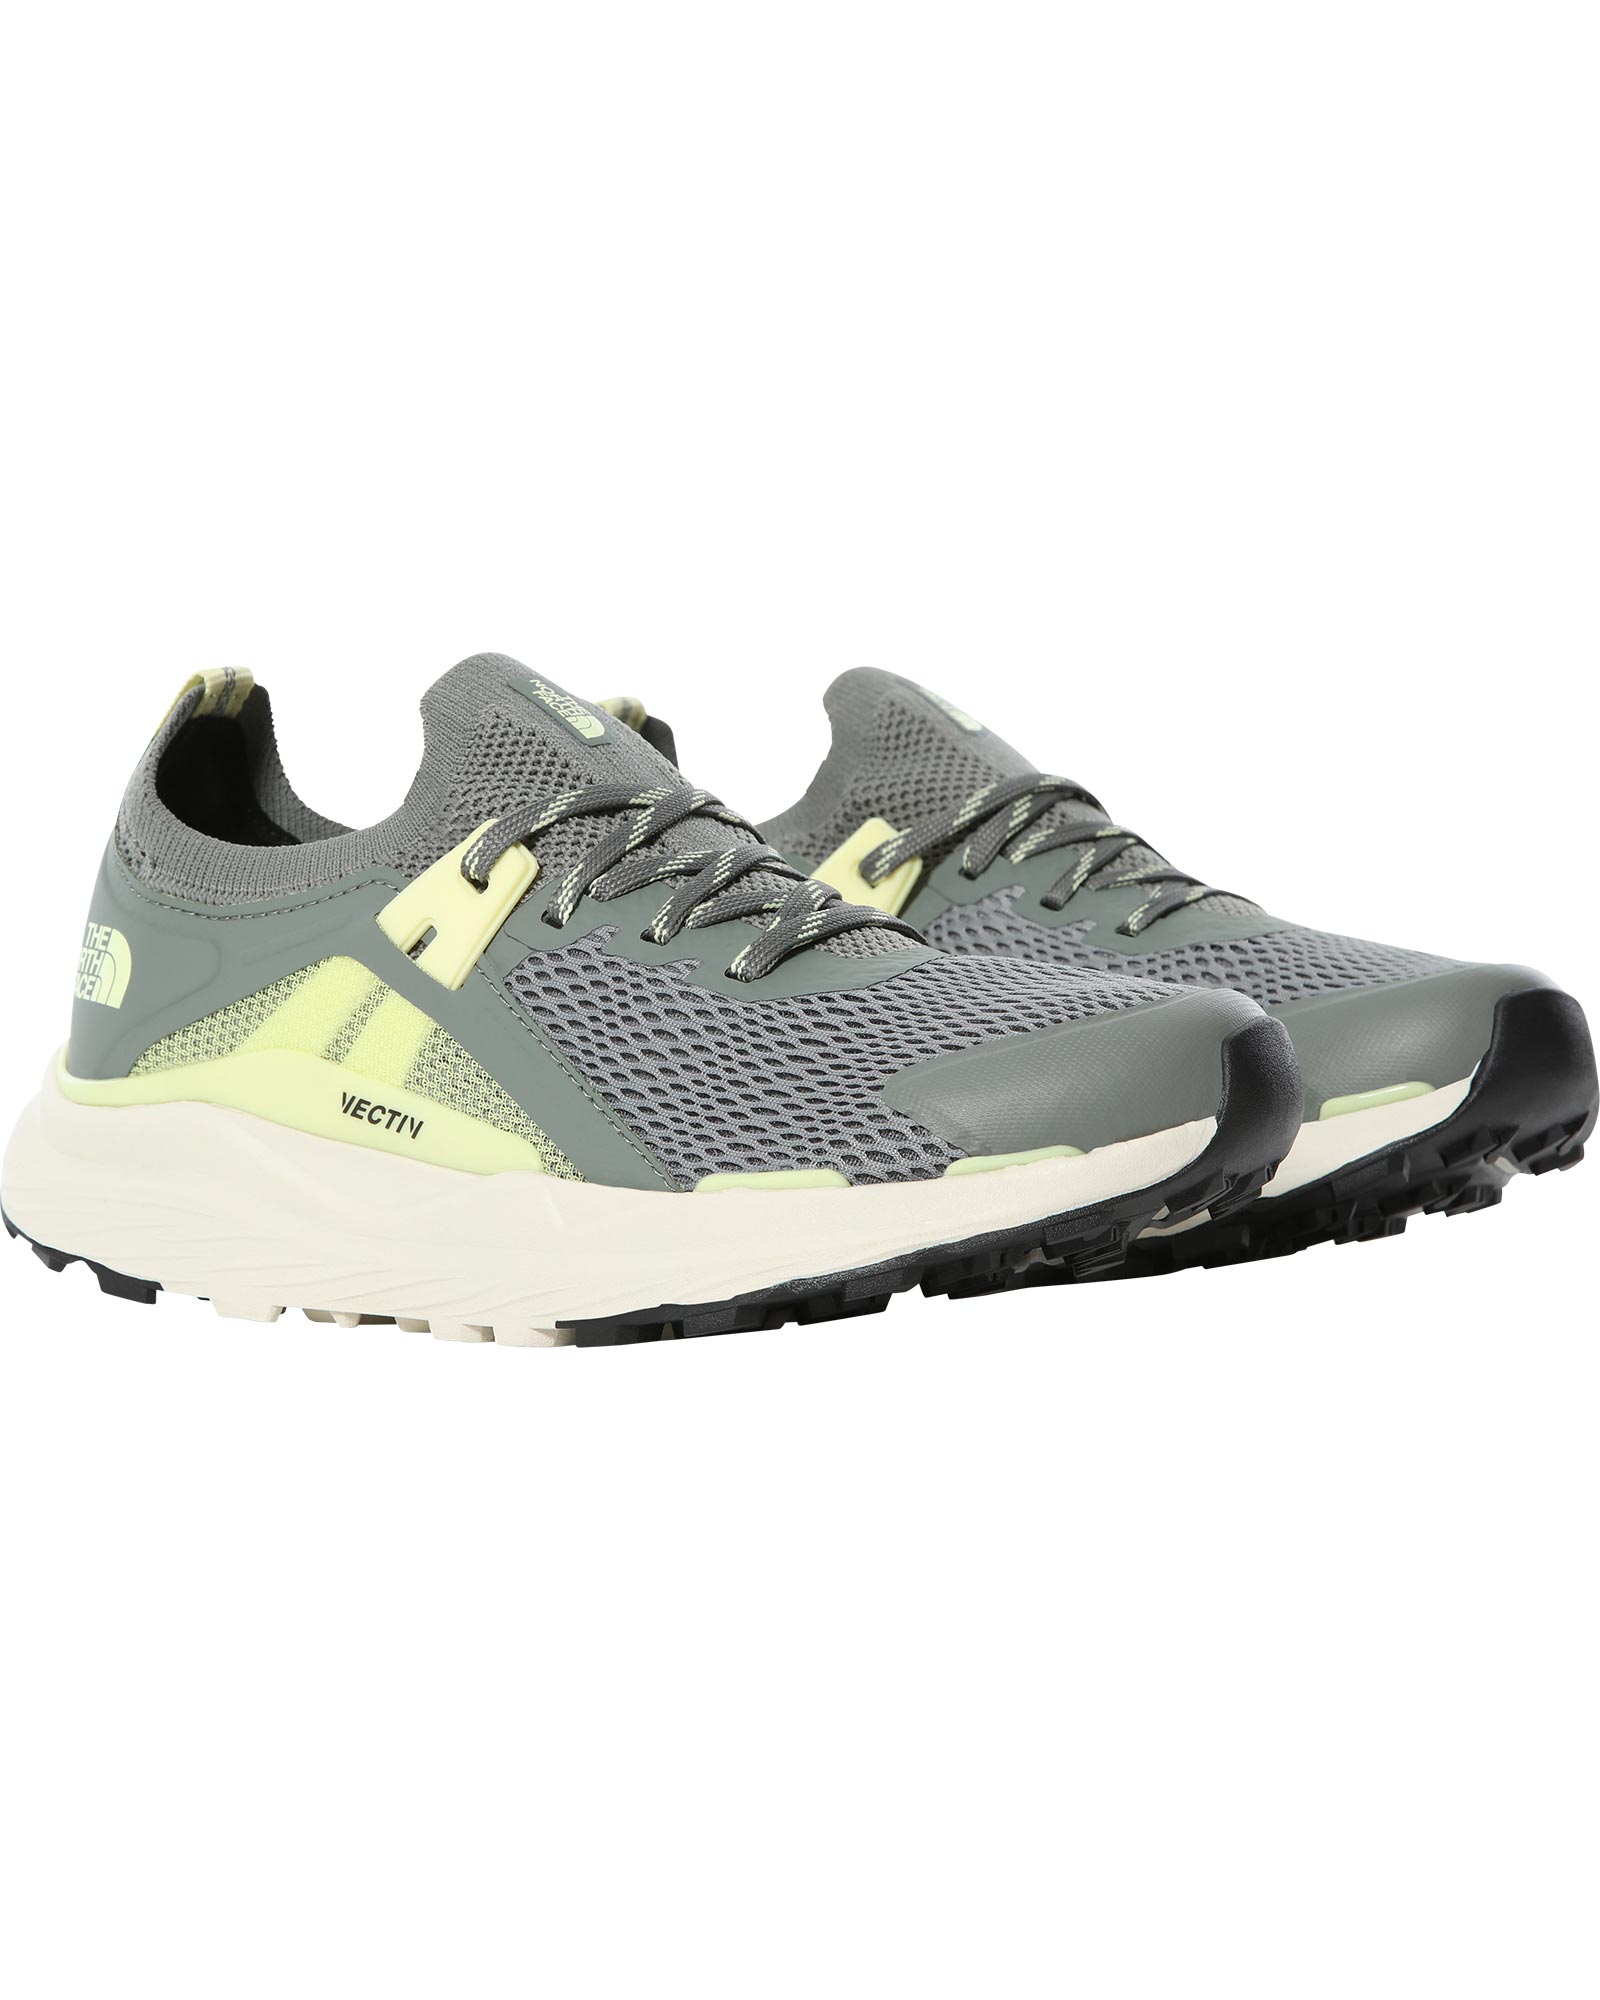 The North Face Vectiv Hypnum Women’s Shoes - Agave Green/Pale Lime Yellow UK 8